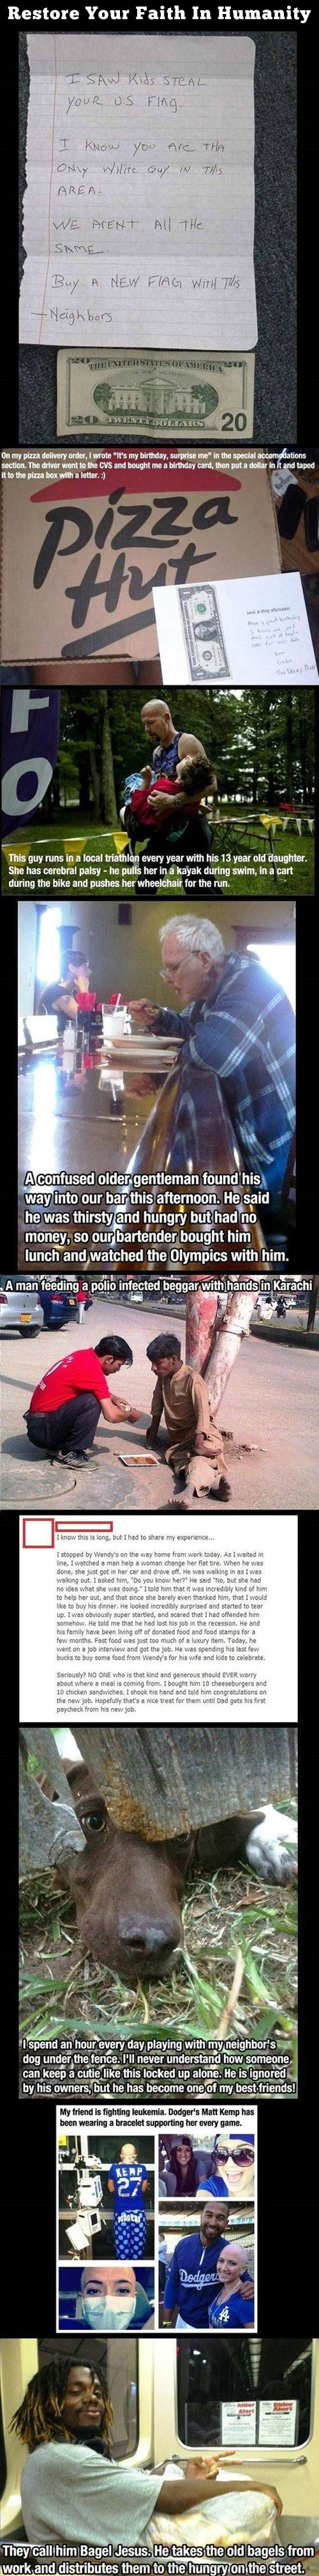 Restore your faith in humanity.